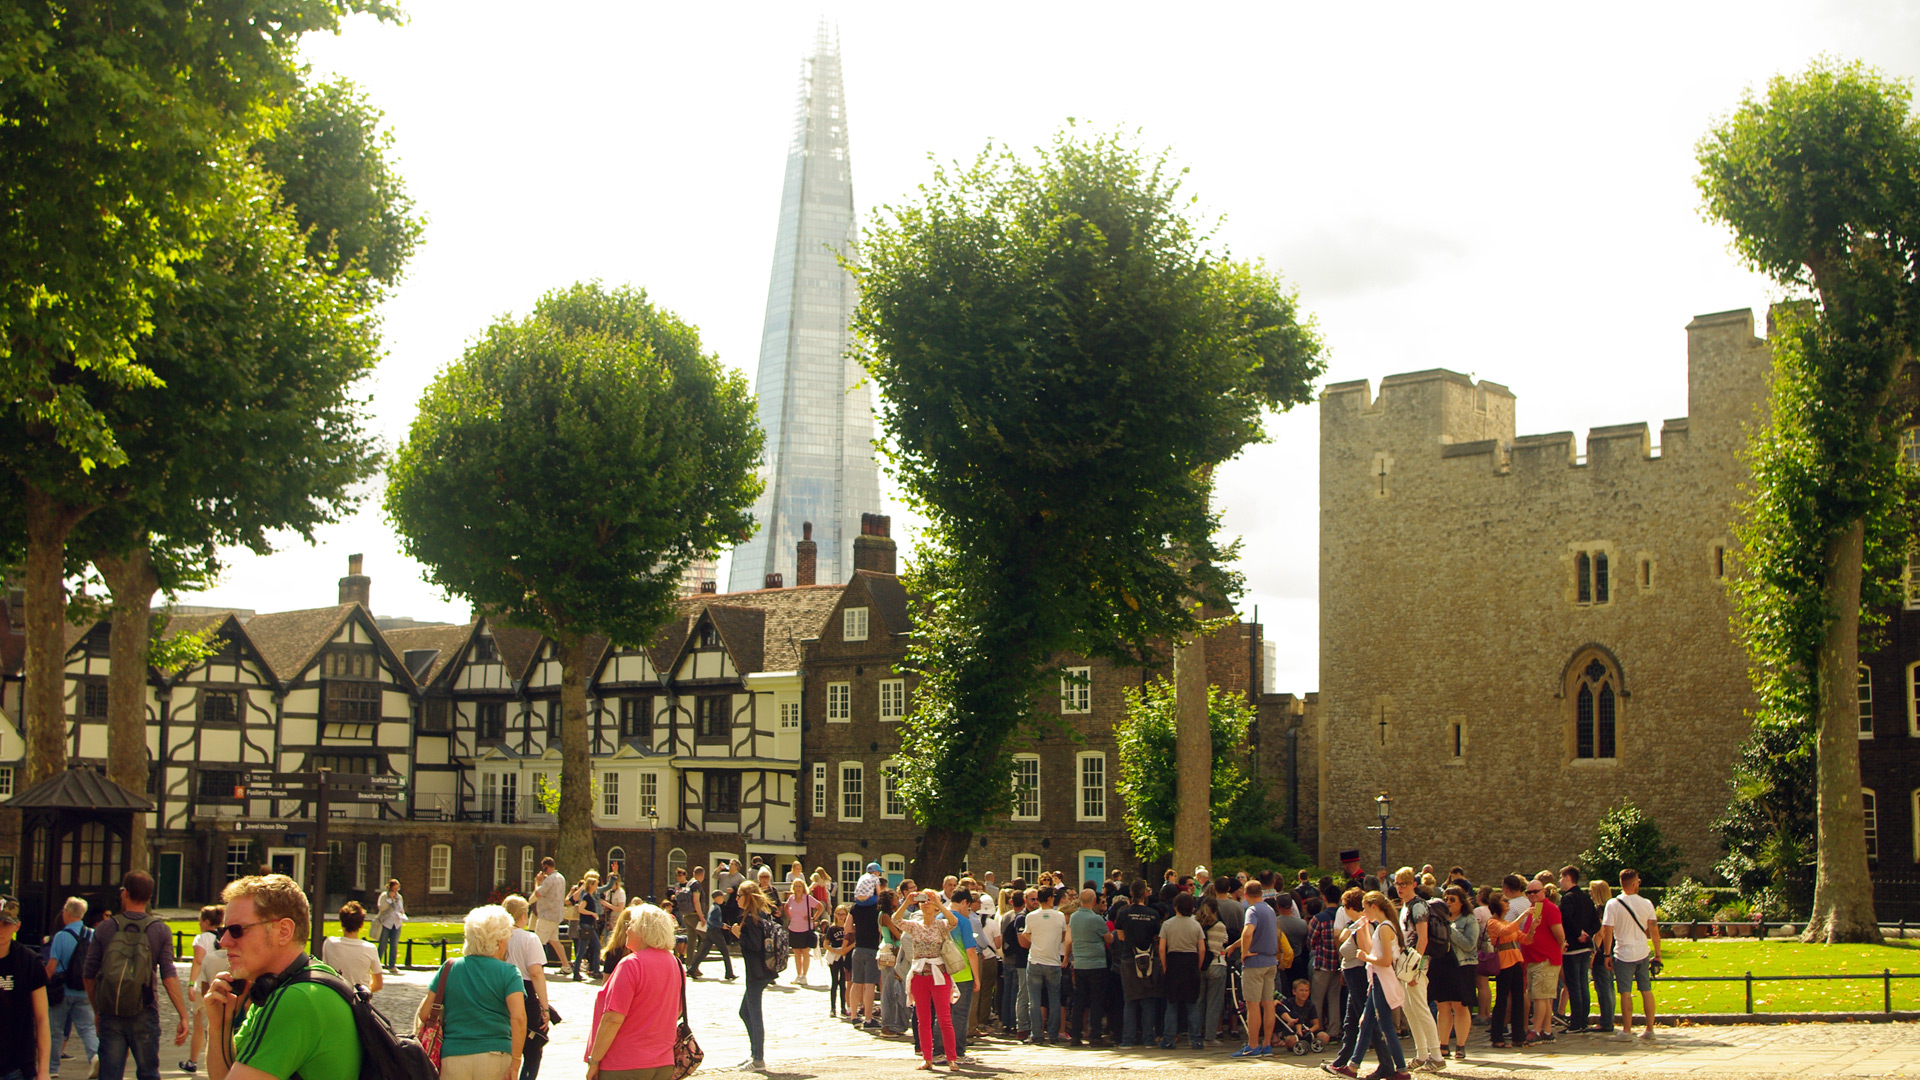 Tower London half timbered buildings Queens House Shard